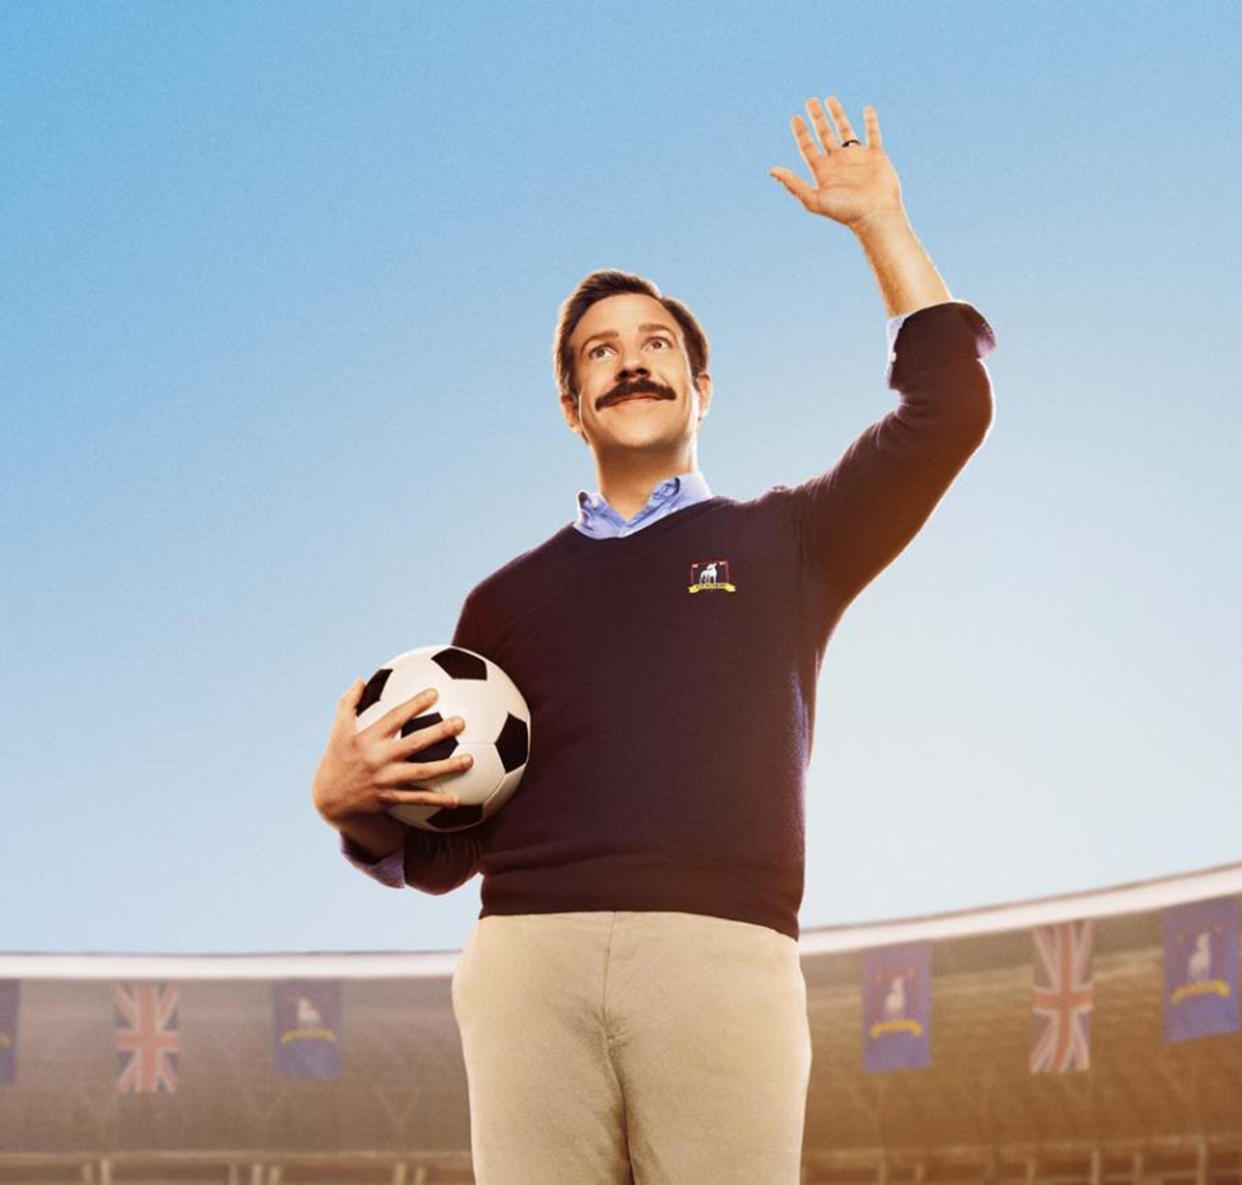 Jason Sudeikis' Ted Lasso is overmatched as a soccer coach, but that doesn't deter him. (Courtesy of Apple TV)